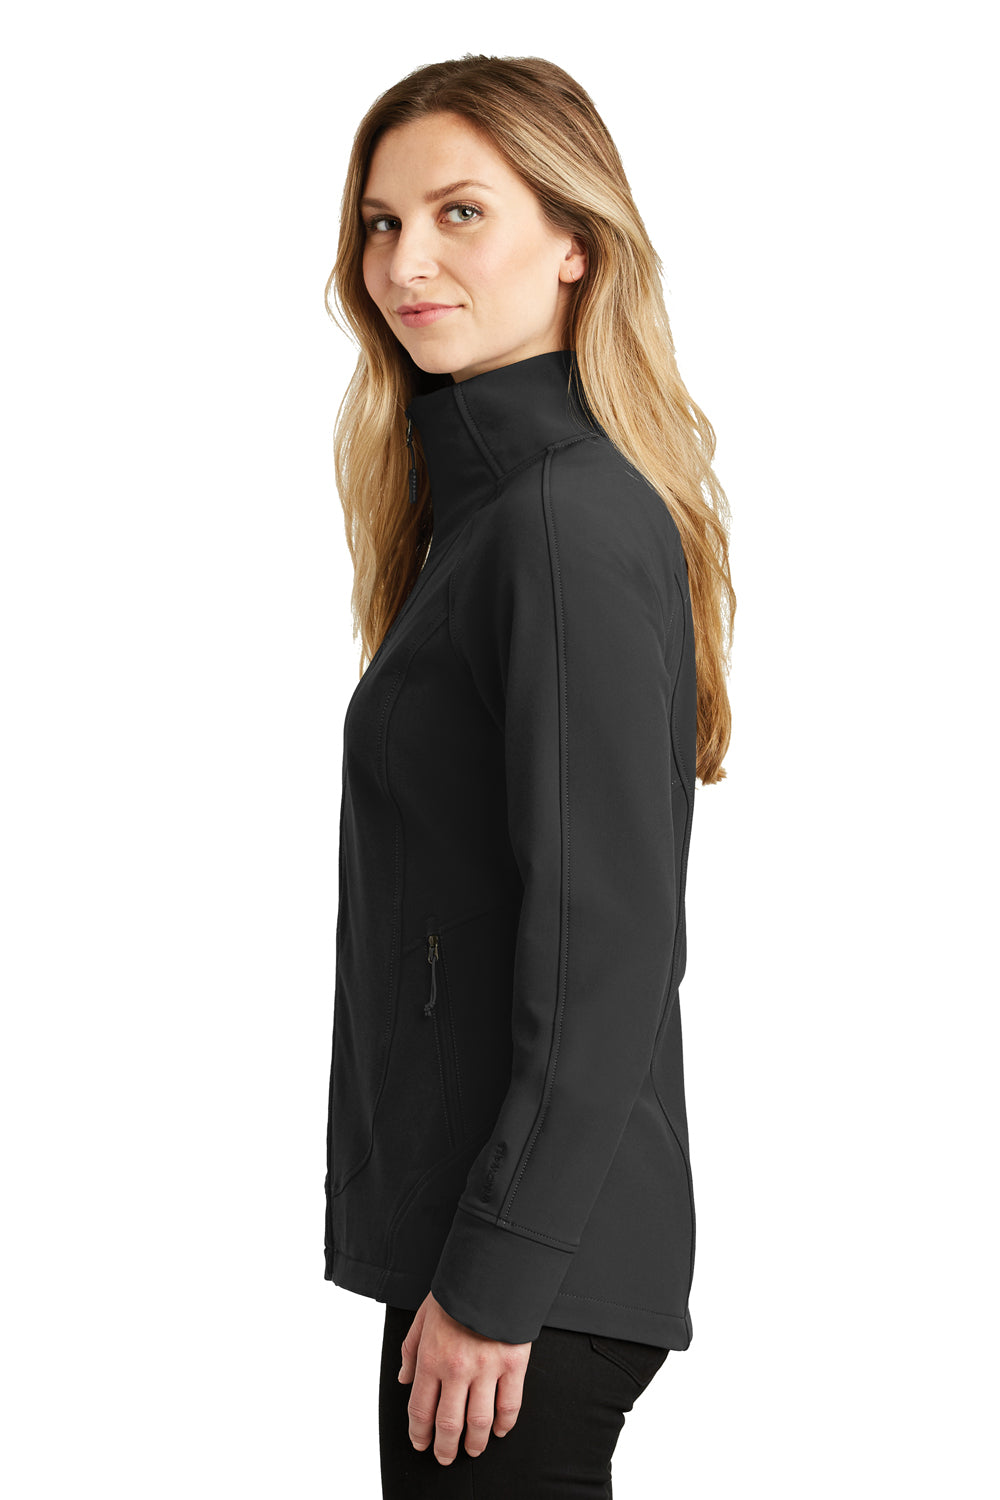 The North Face NF0A3LGW Womens Tech Wind & Water Resistant Full Zip Jacket Black Side